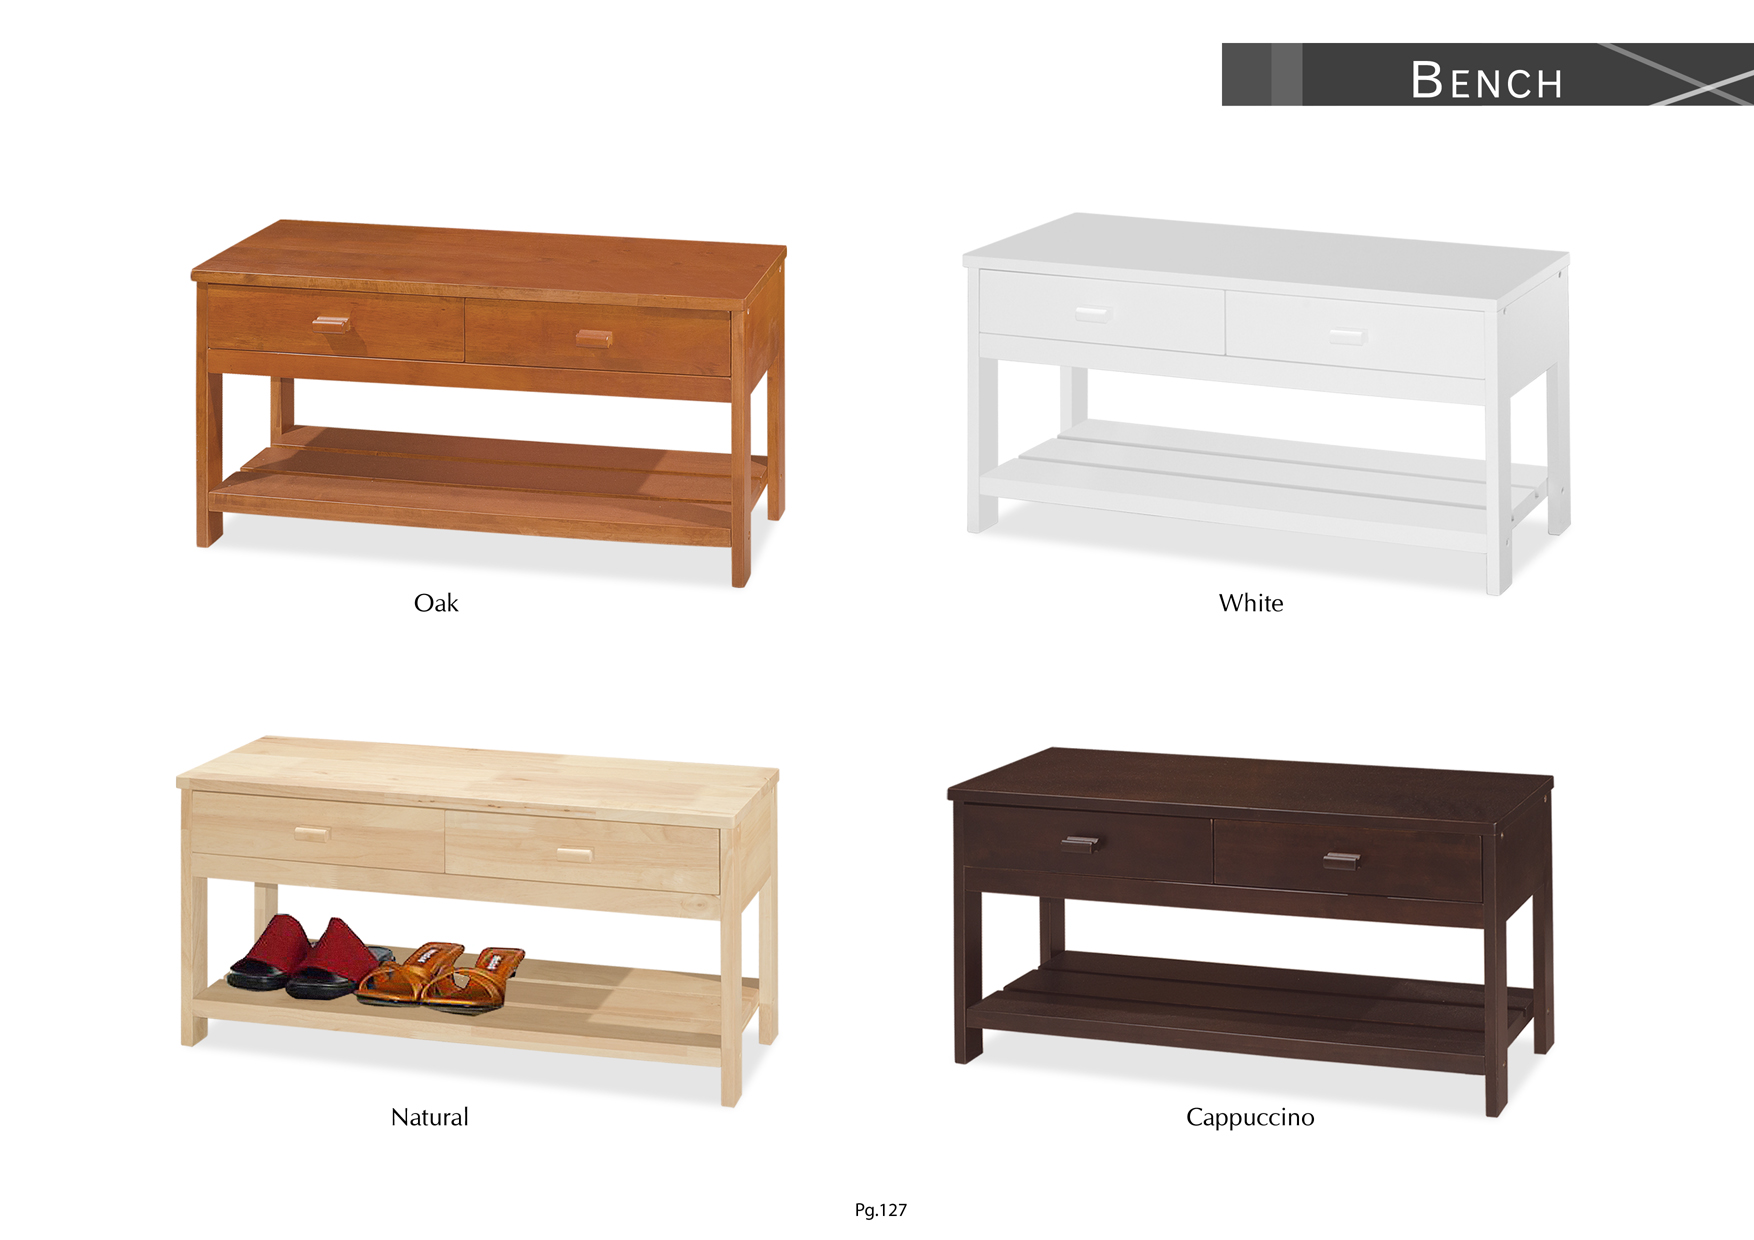 Product: PG127. POLO SHOE BENCH